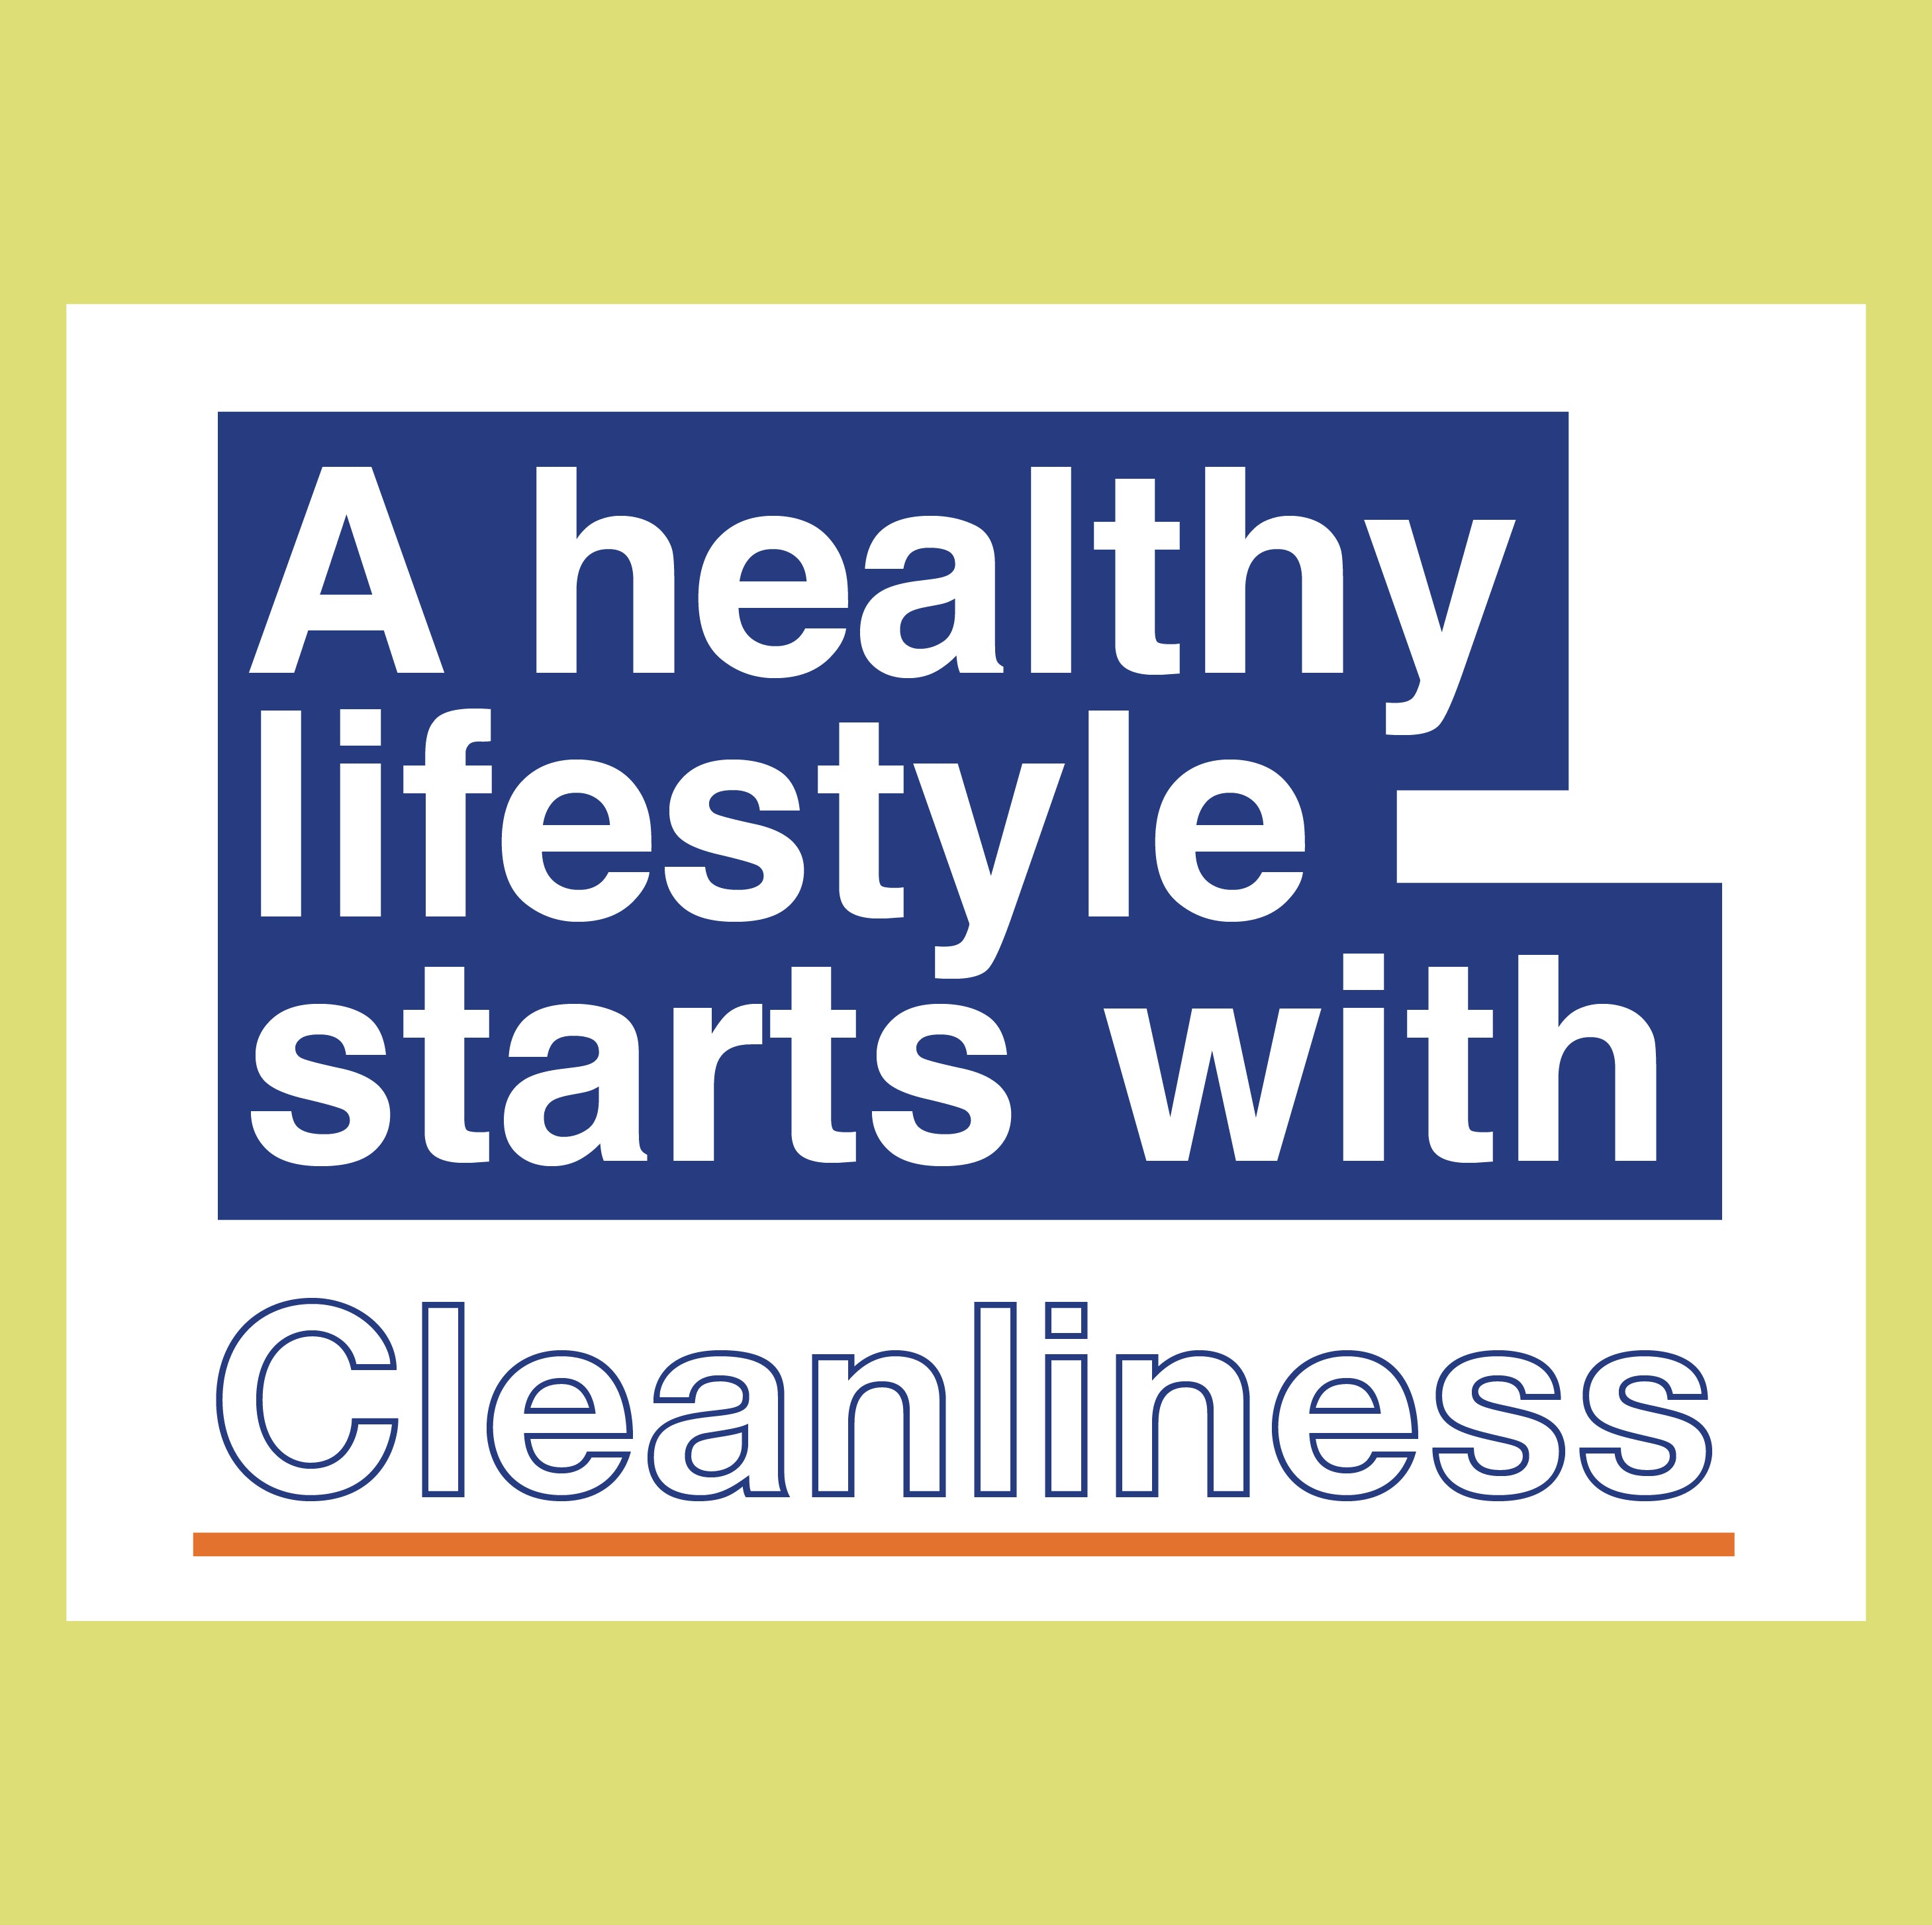 A healthy lifestyle starts with Cleanliness